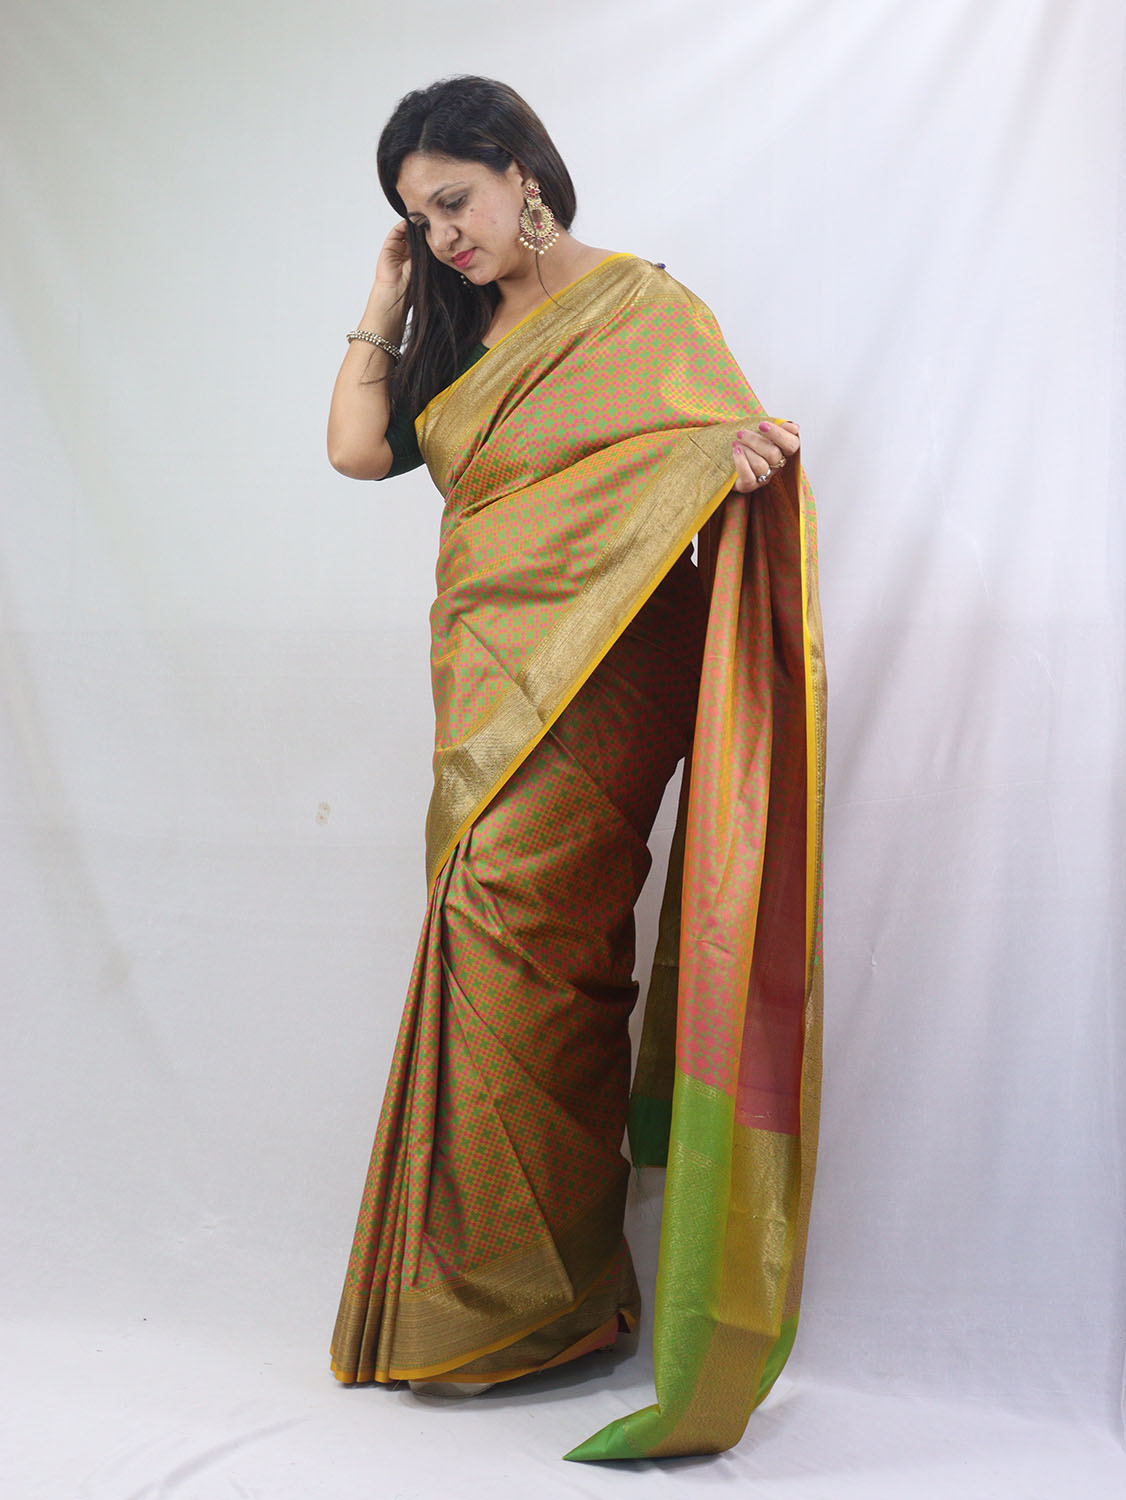 Shop Now for Yellow Banarasi Soft Silk Saree with Contrast Border - Latest Collection